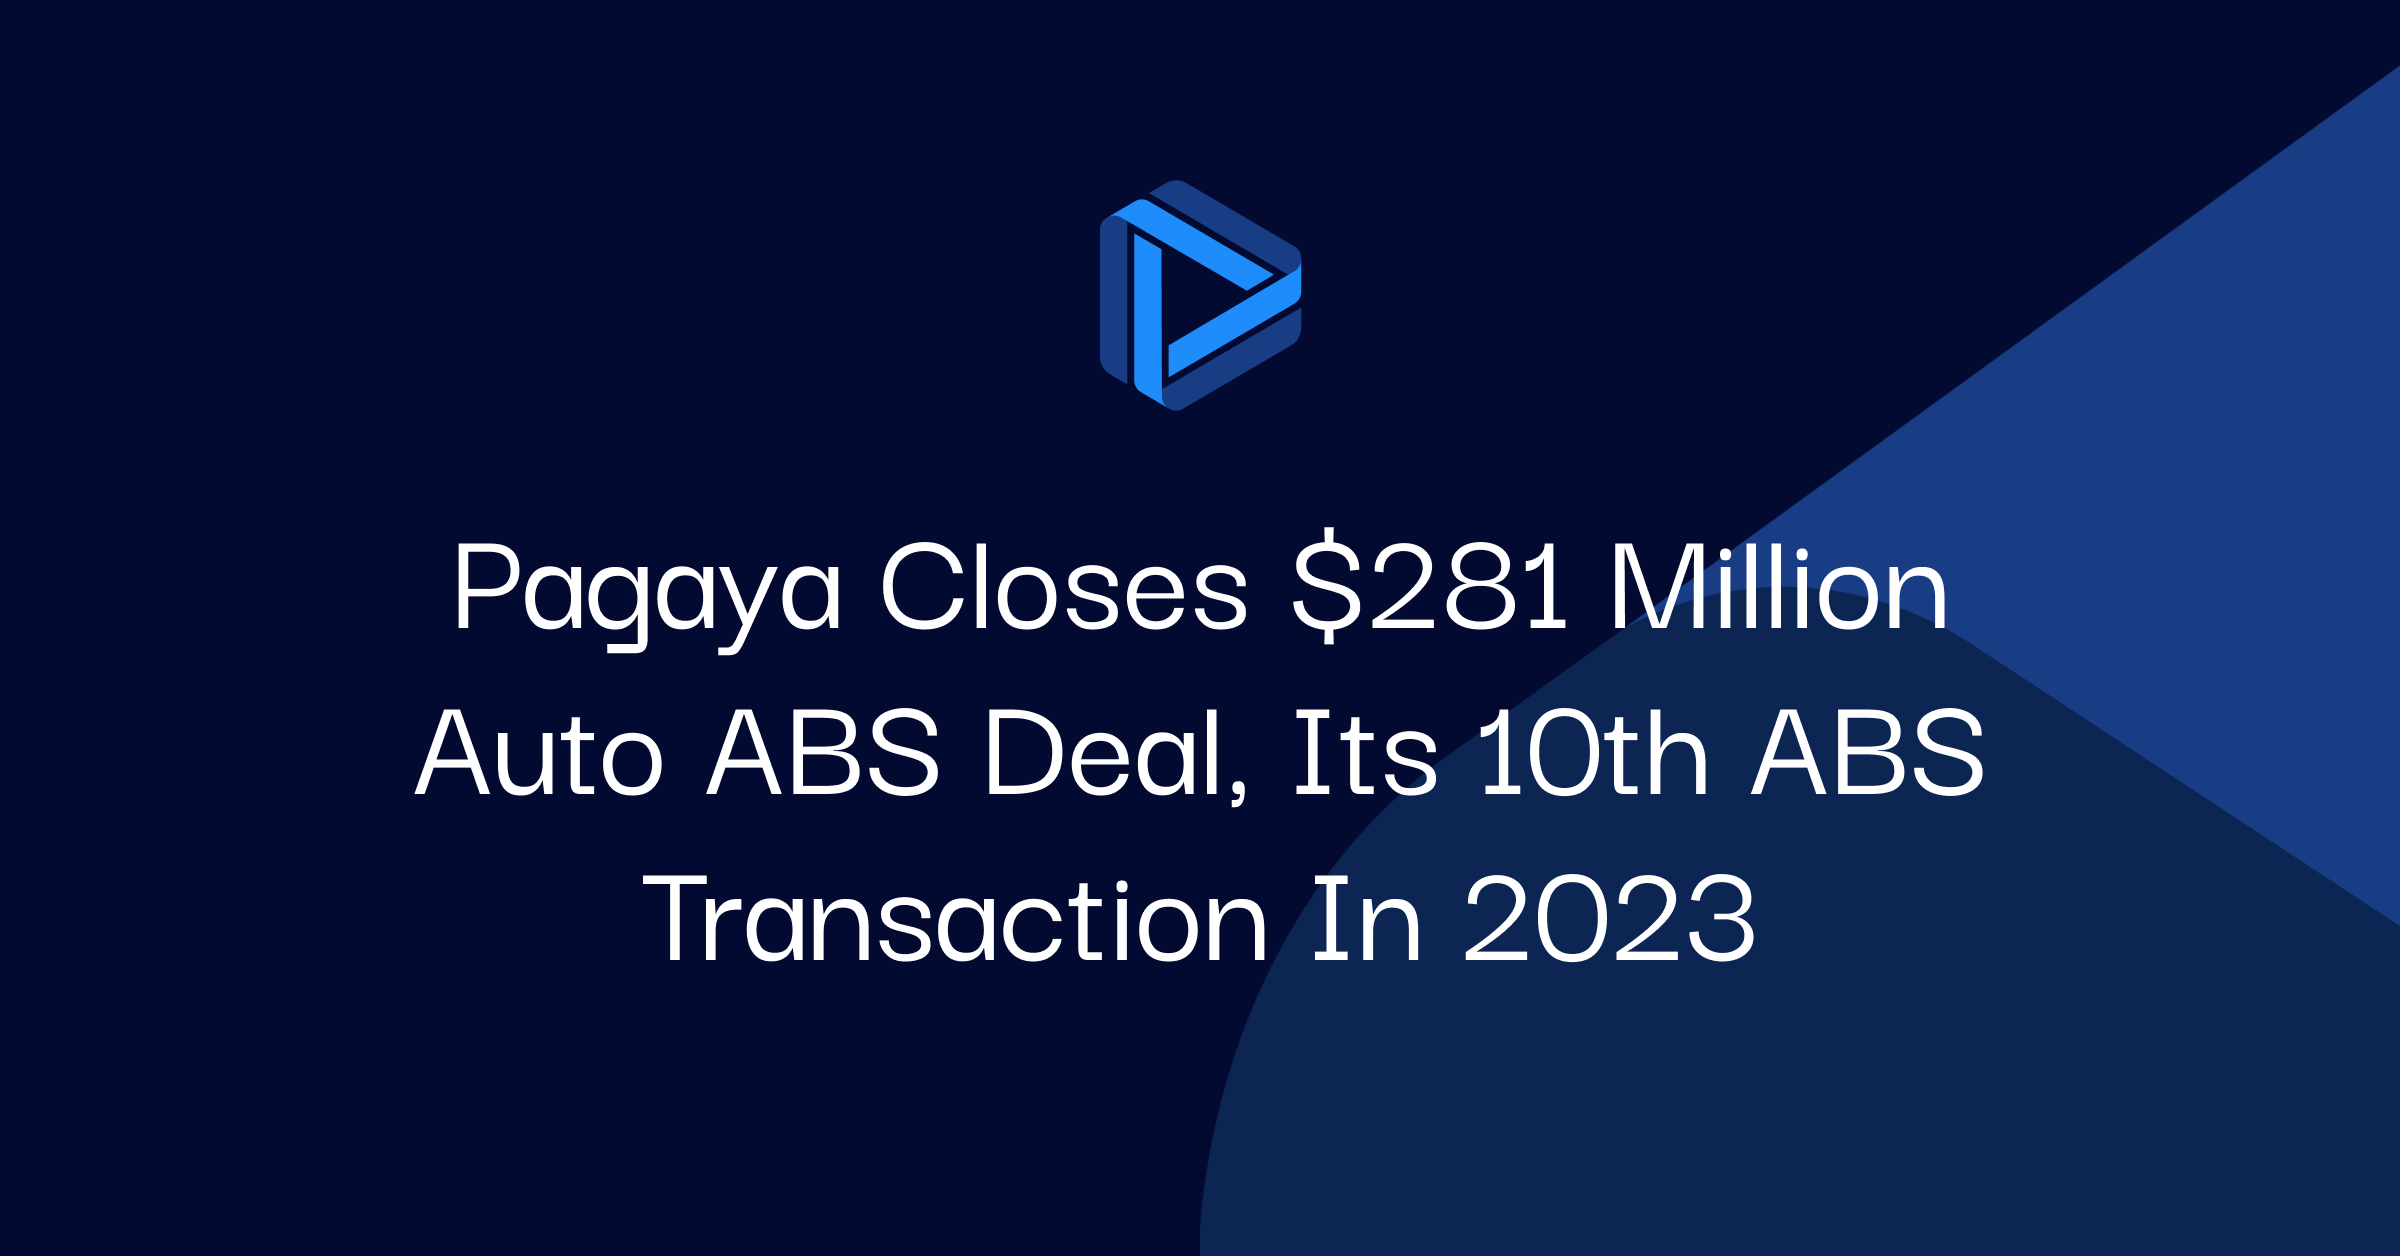 Pagaya Closes $281 Million Auto ABS Deal, its 10th ABS Transaction in 2023